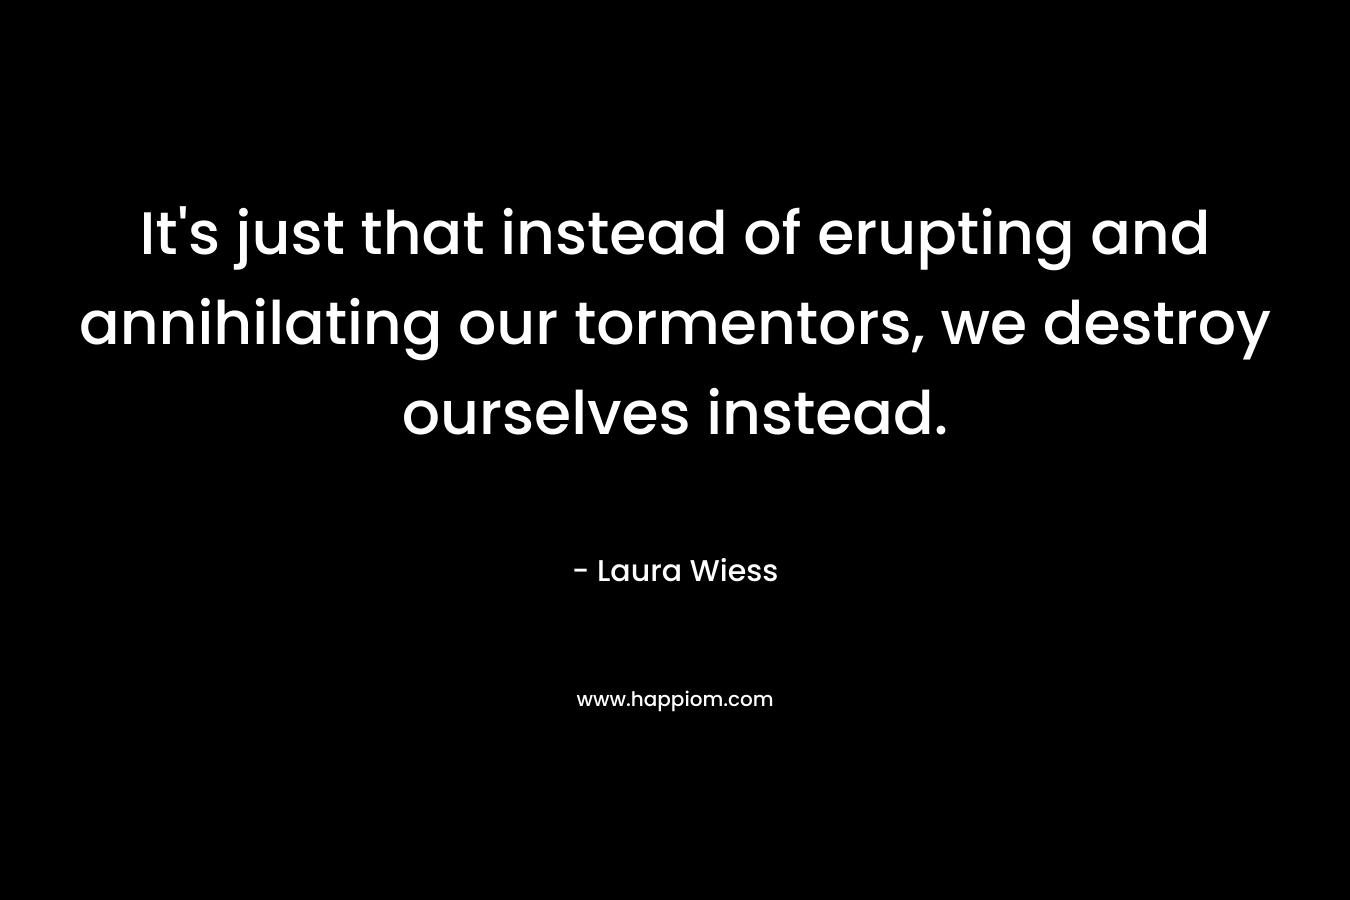 It’s just that instead of erupting and annihilating our tormentors, we destroy ourselves instead. – Laura Wiess